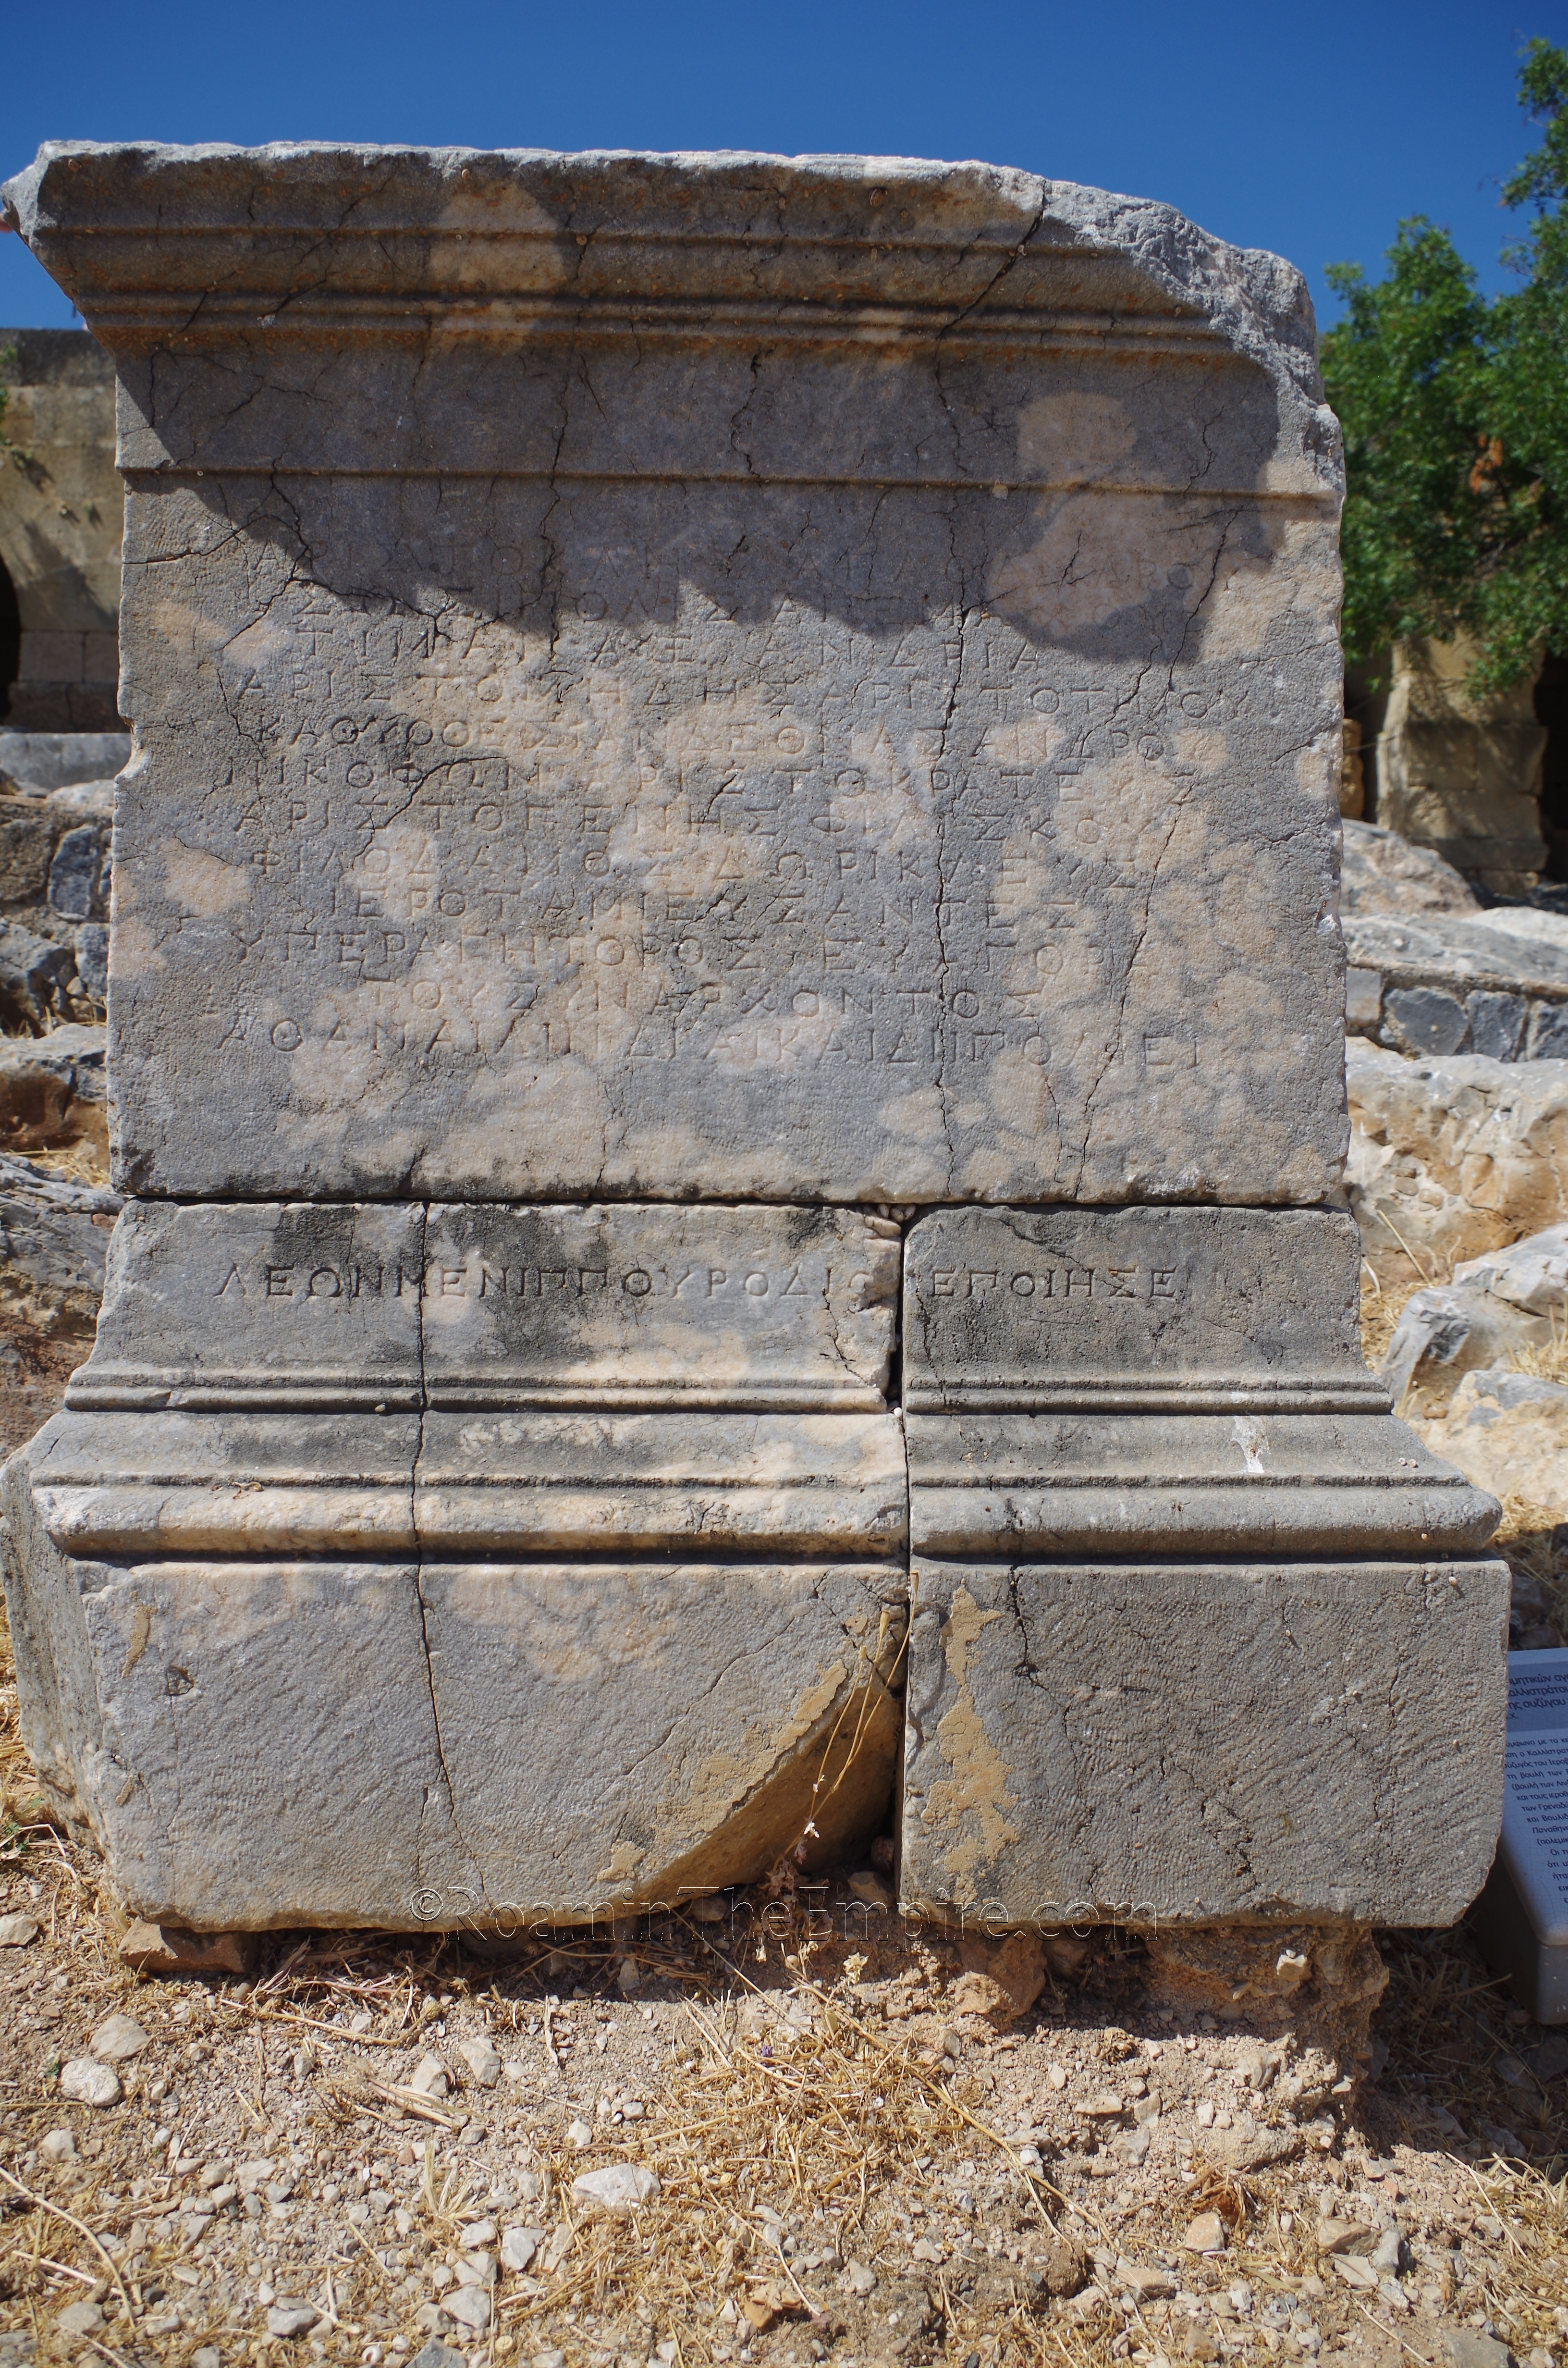 Honorific base on the lower acropolis dedicated to Kallistratos, priest of Athena Lindia, and his wife Hieroboula by a number of entities in Lindus. The inscription also lists other honorific gifts bestowed upon the couple. Dated to 23 CE.